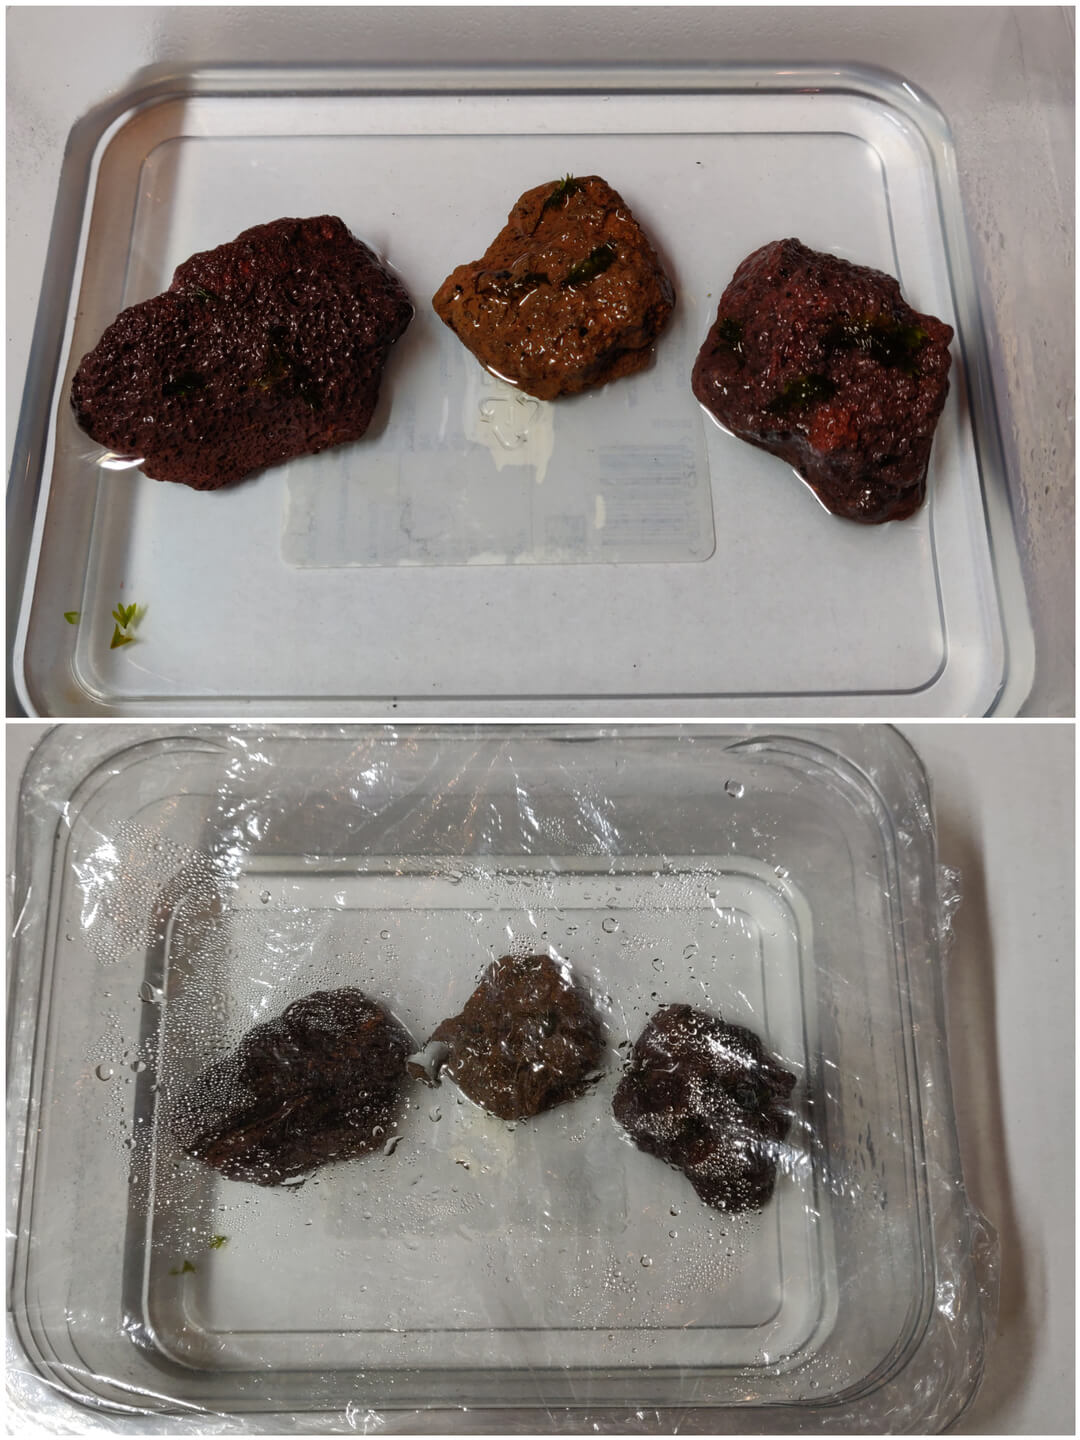 Wet lava rocks with moss placed in plastic container